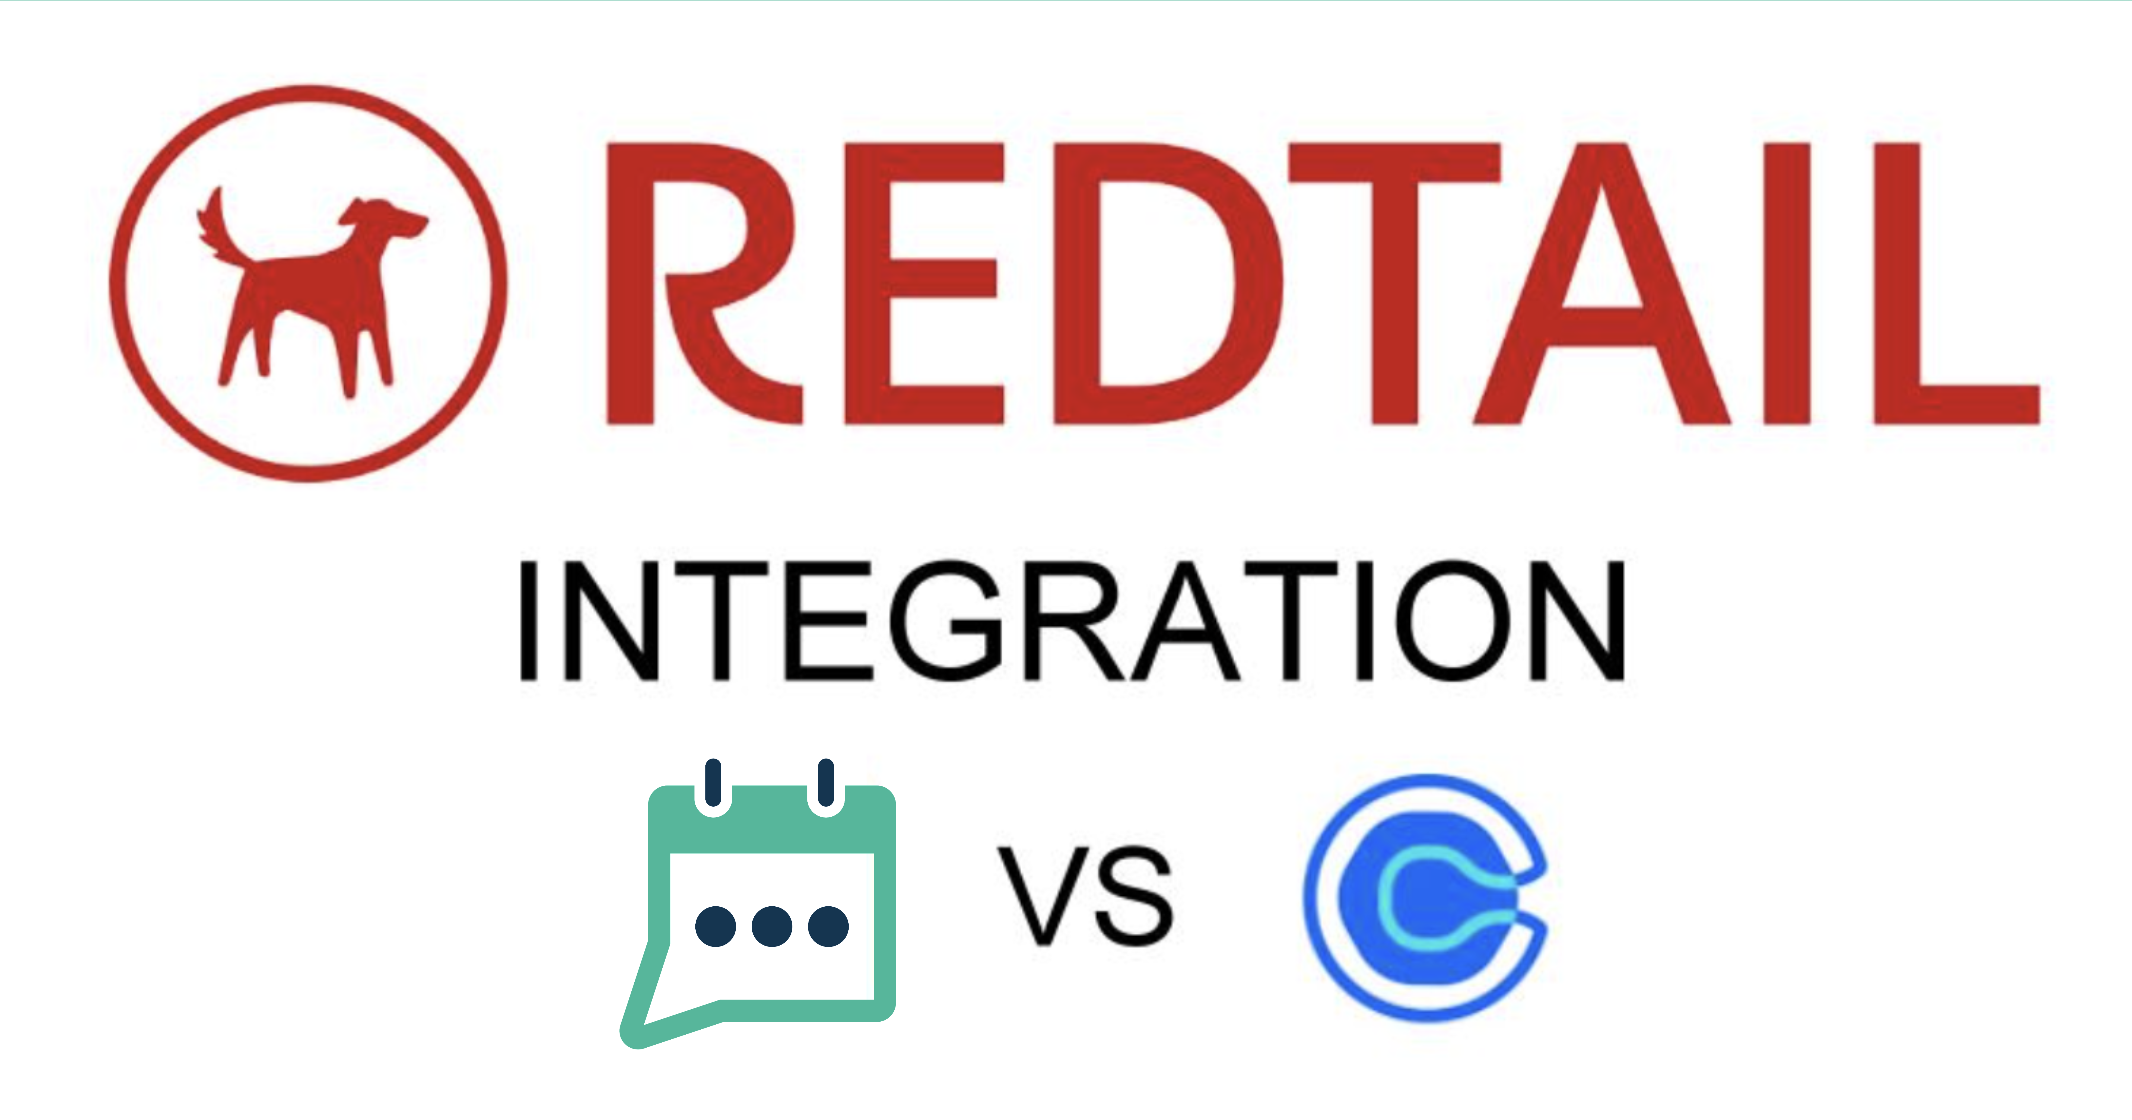 Redtail Integration: GReminders vs Calendly